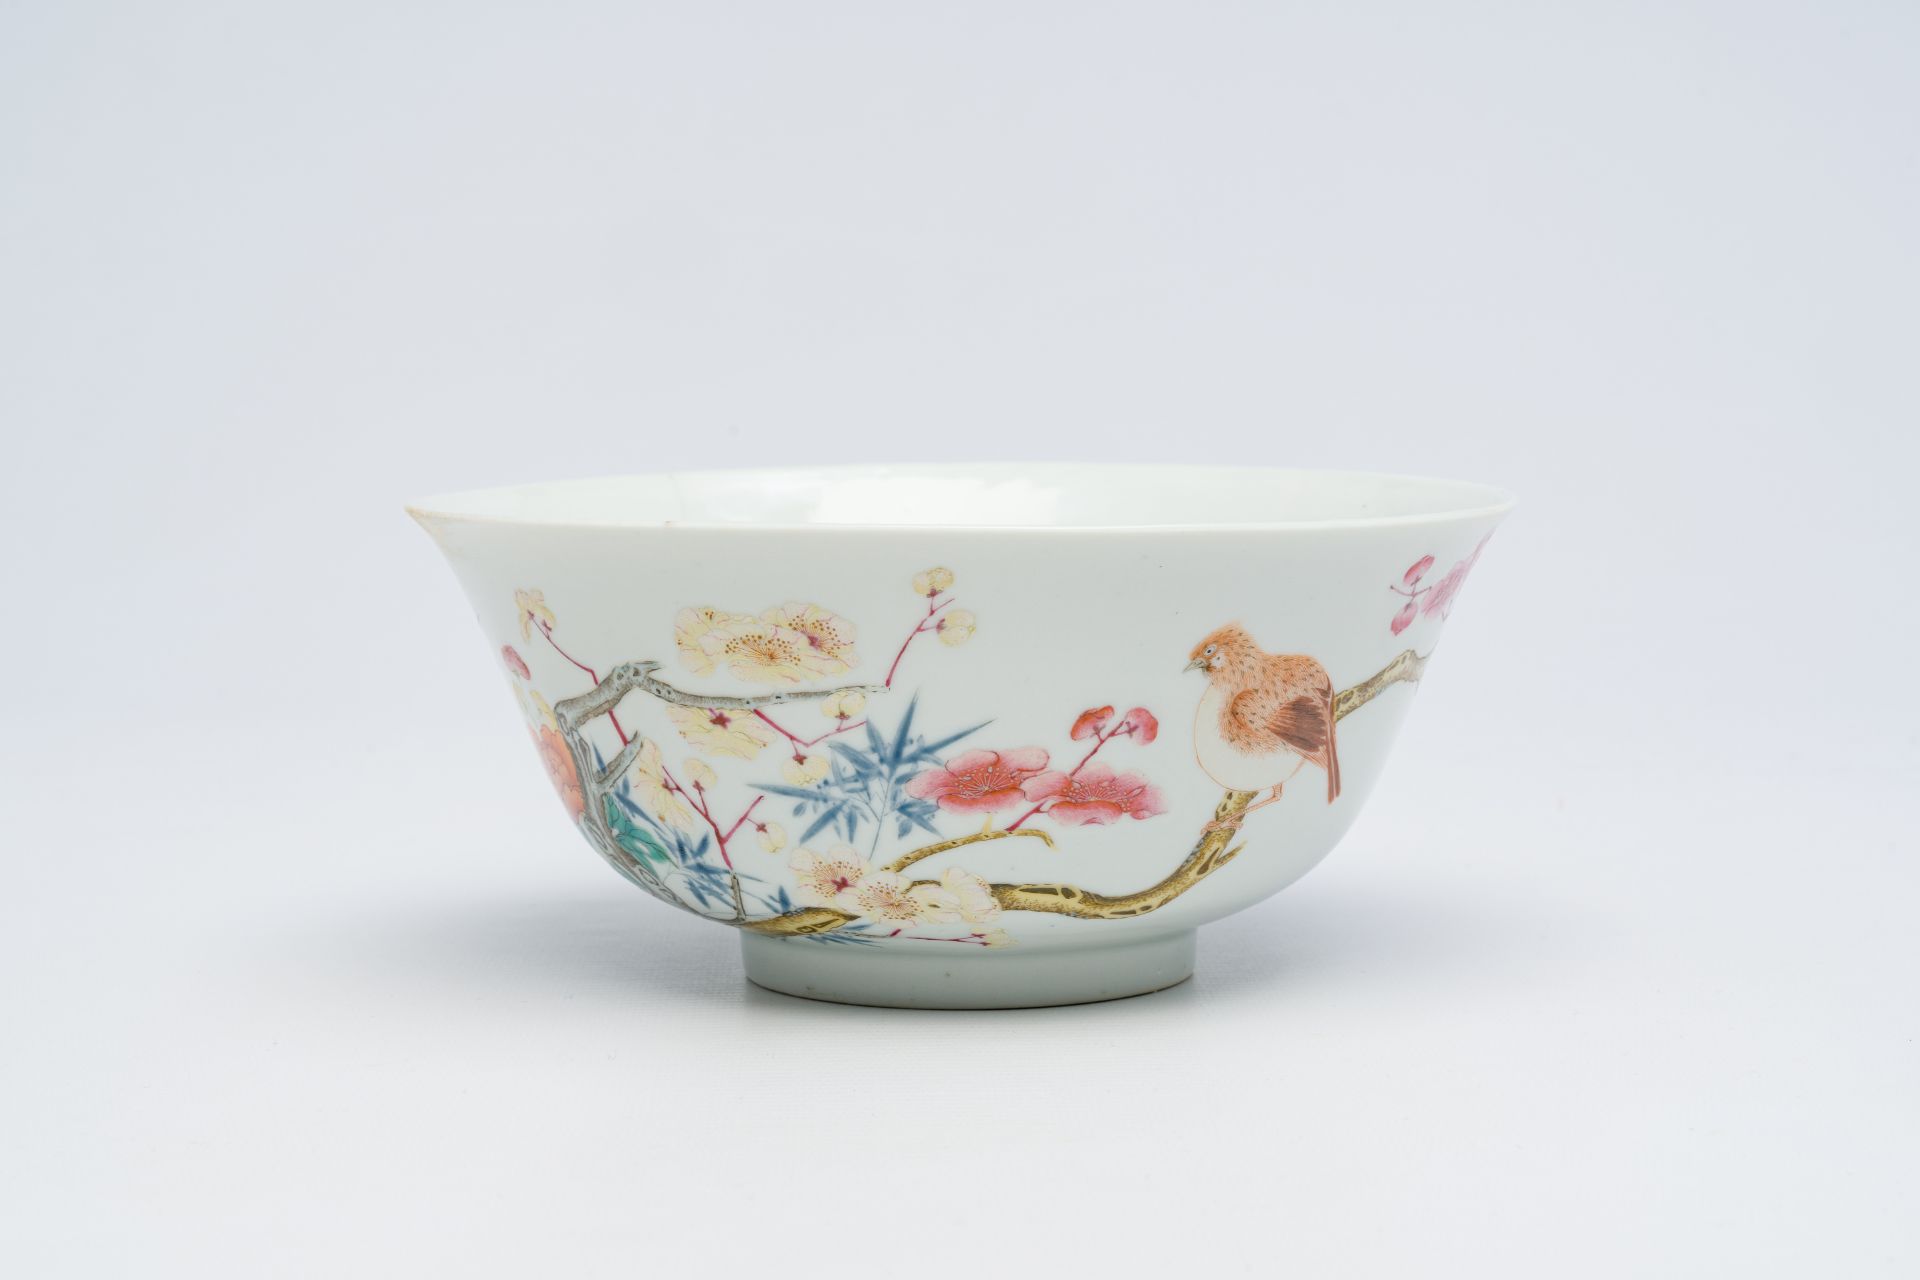 A Chinese famille rose bowl with birds among blossoming branches, Yongzheng mark, Republic